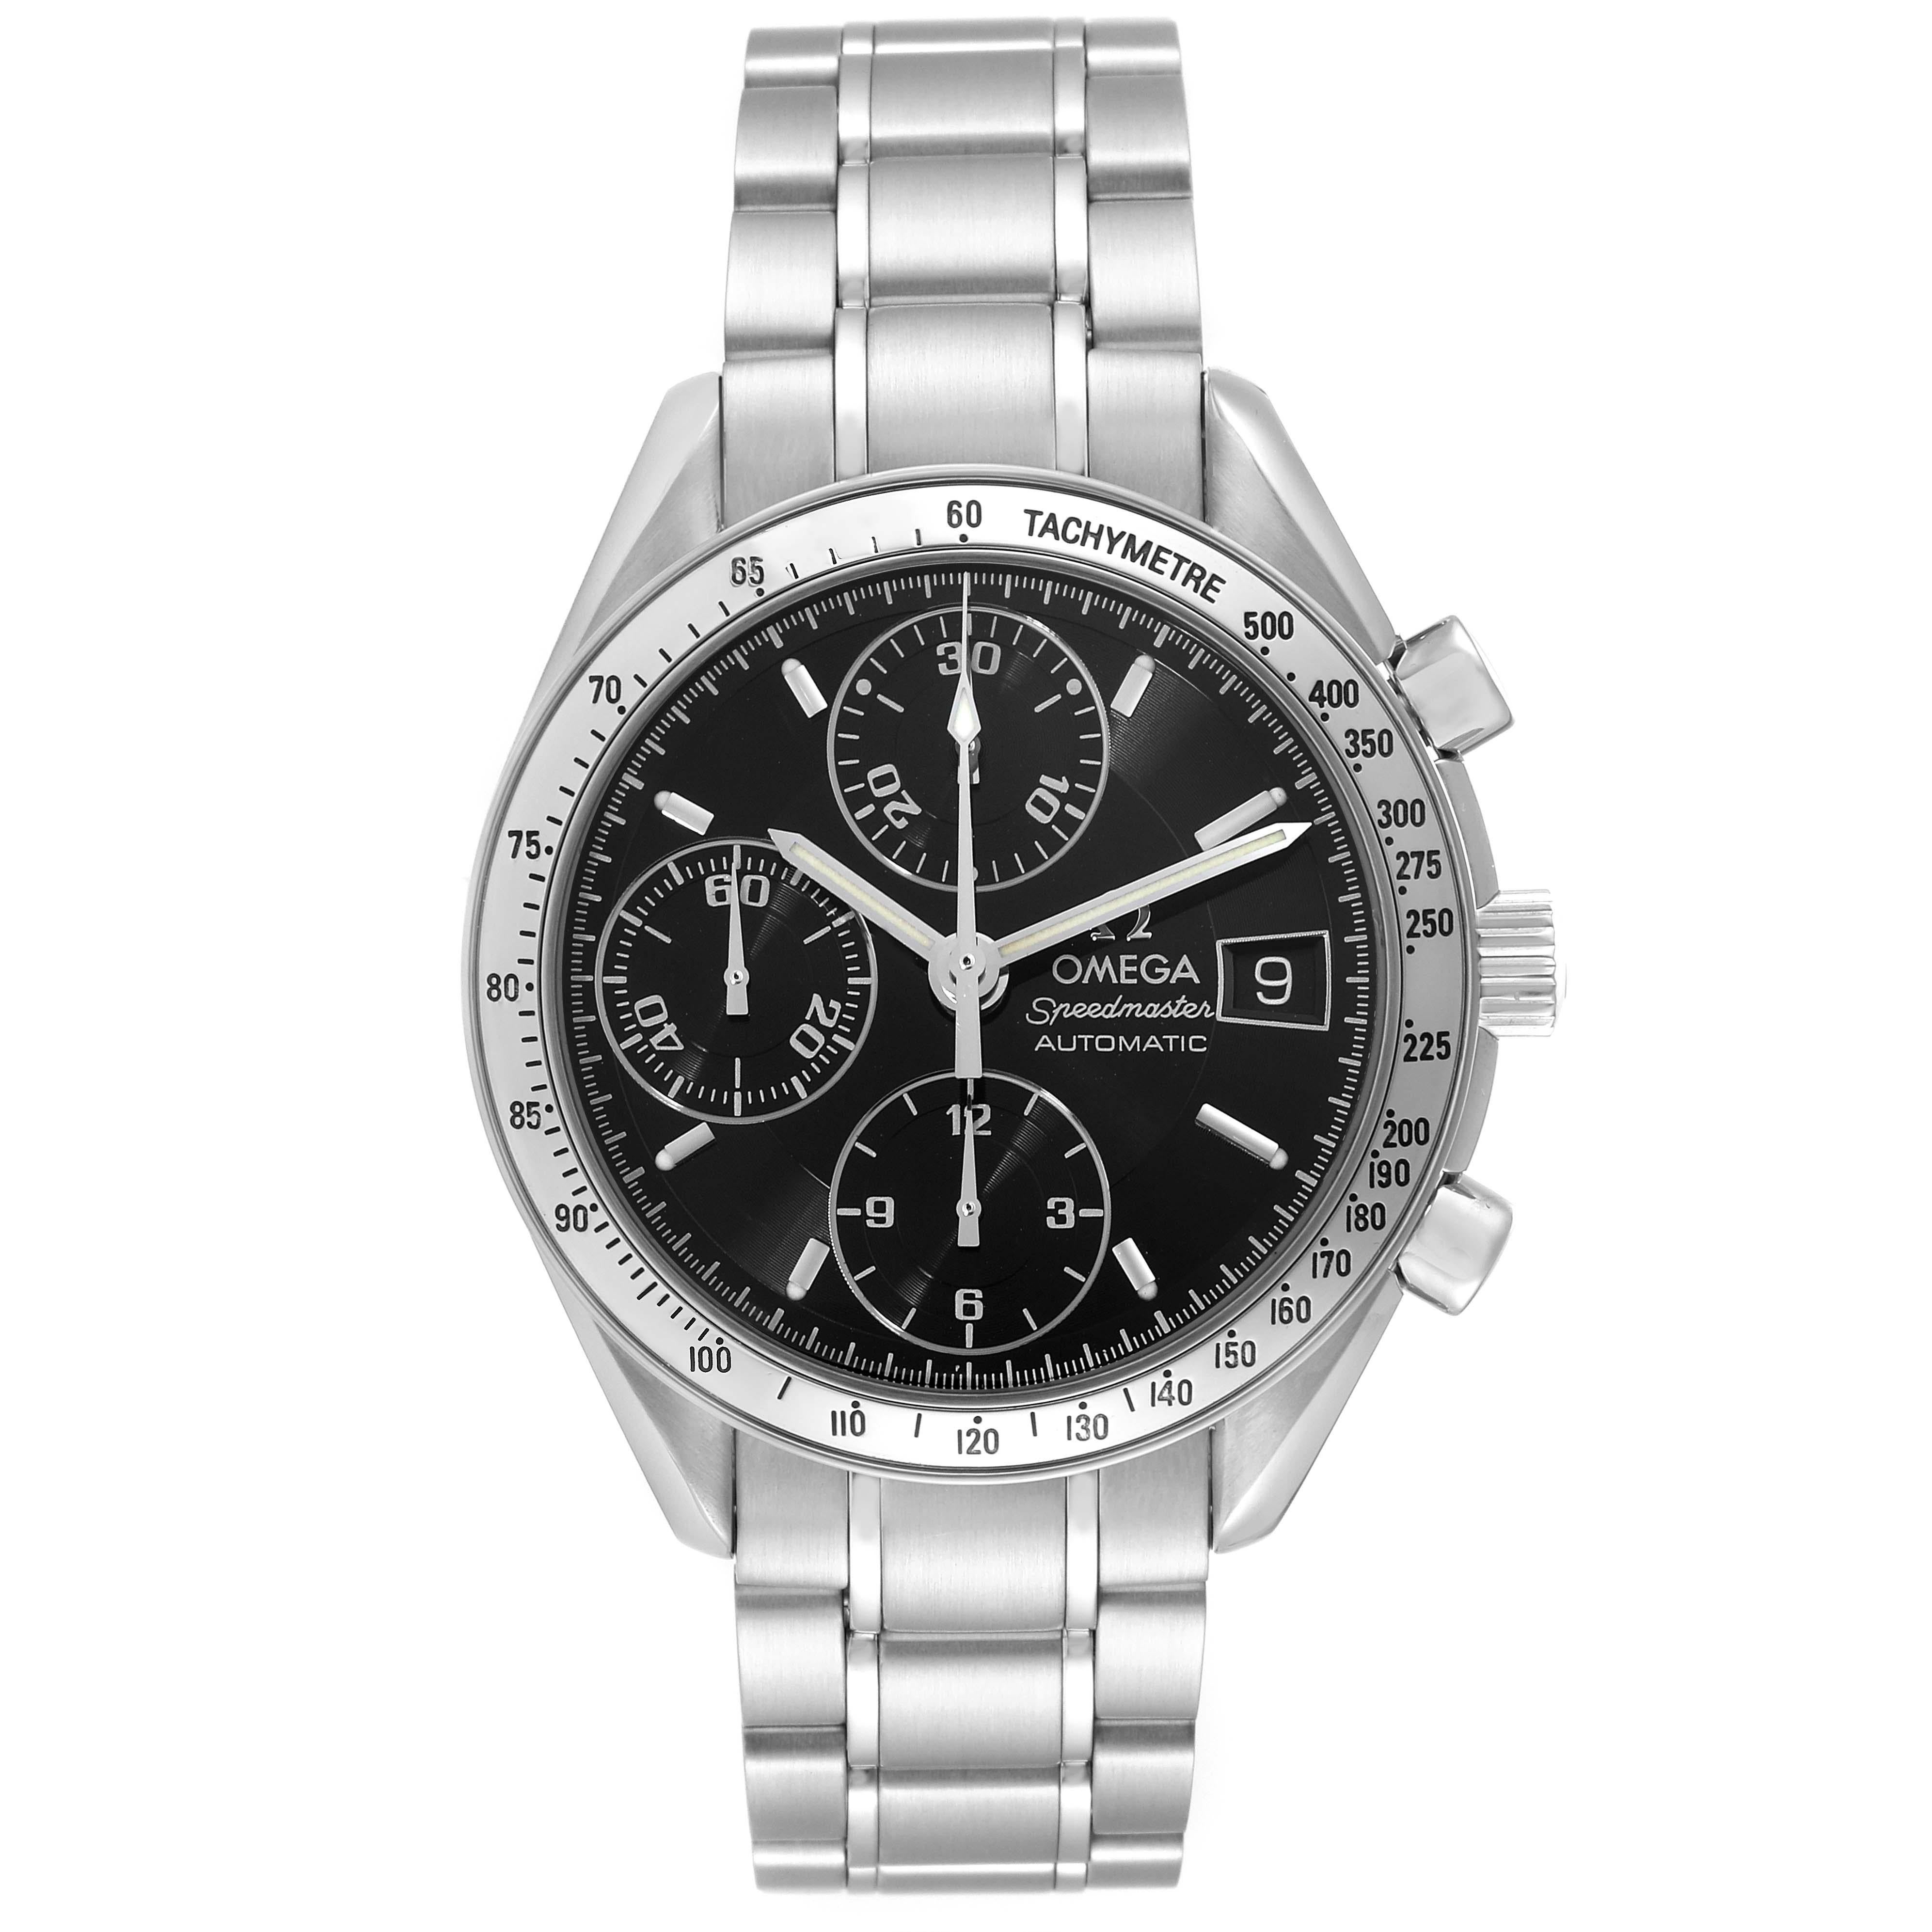 Omega Speedmaster Date 39mm Automatic Steel Mens Watch 3513.50.00. Automatic self-winding chronograph movement. Stainless steel round case 39 mm in diameter. Stainless steel bezel with tachymetre function. Scratch-resistant sapphire crystal with